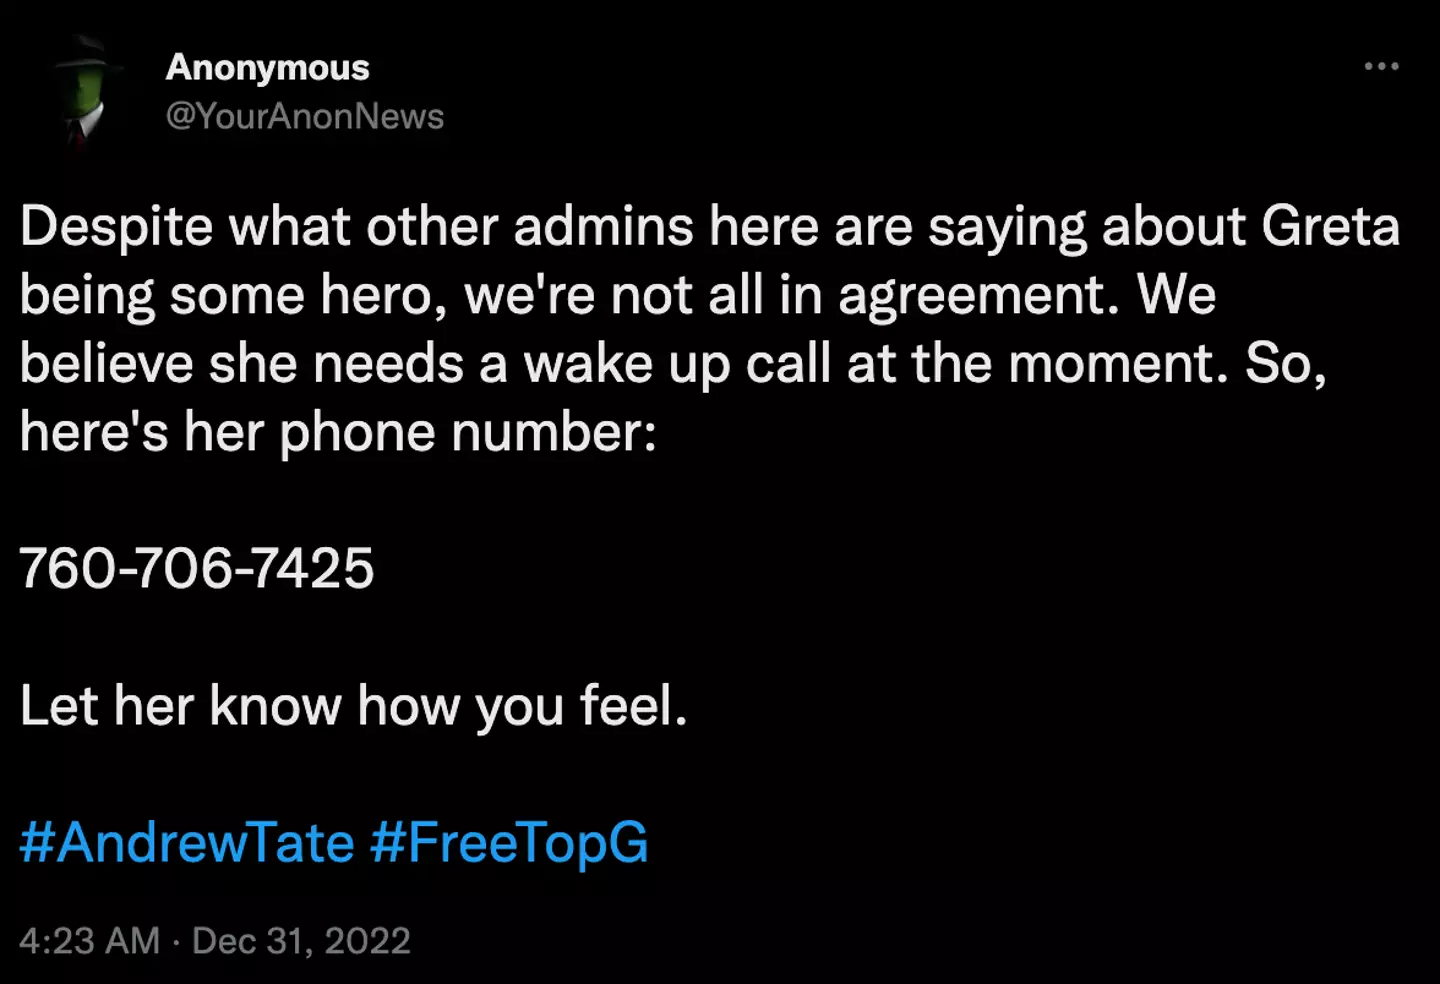 Anonymous has pranked the internet by pretending to release Greta Thunberg's number.